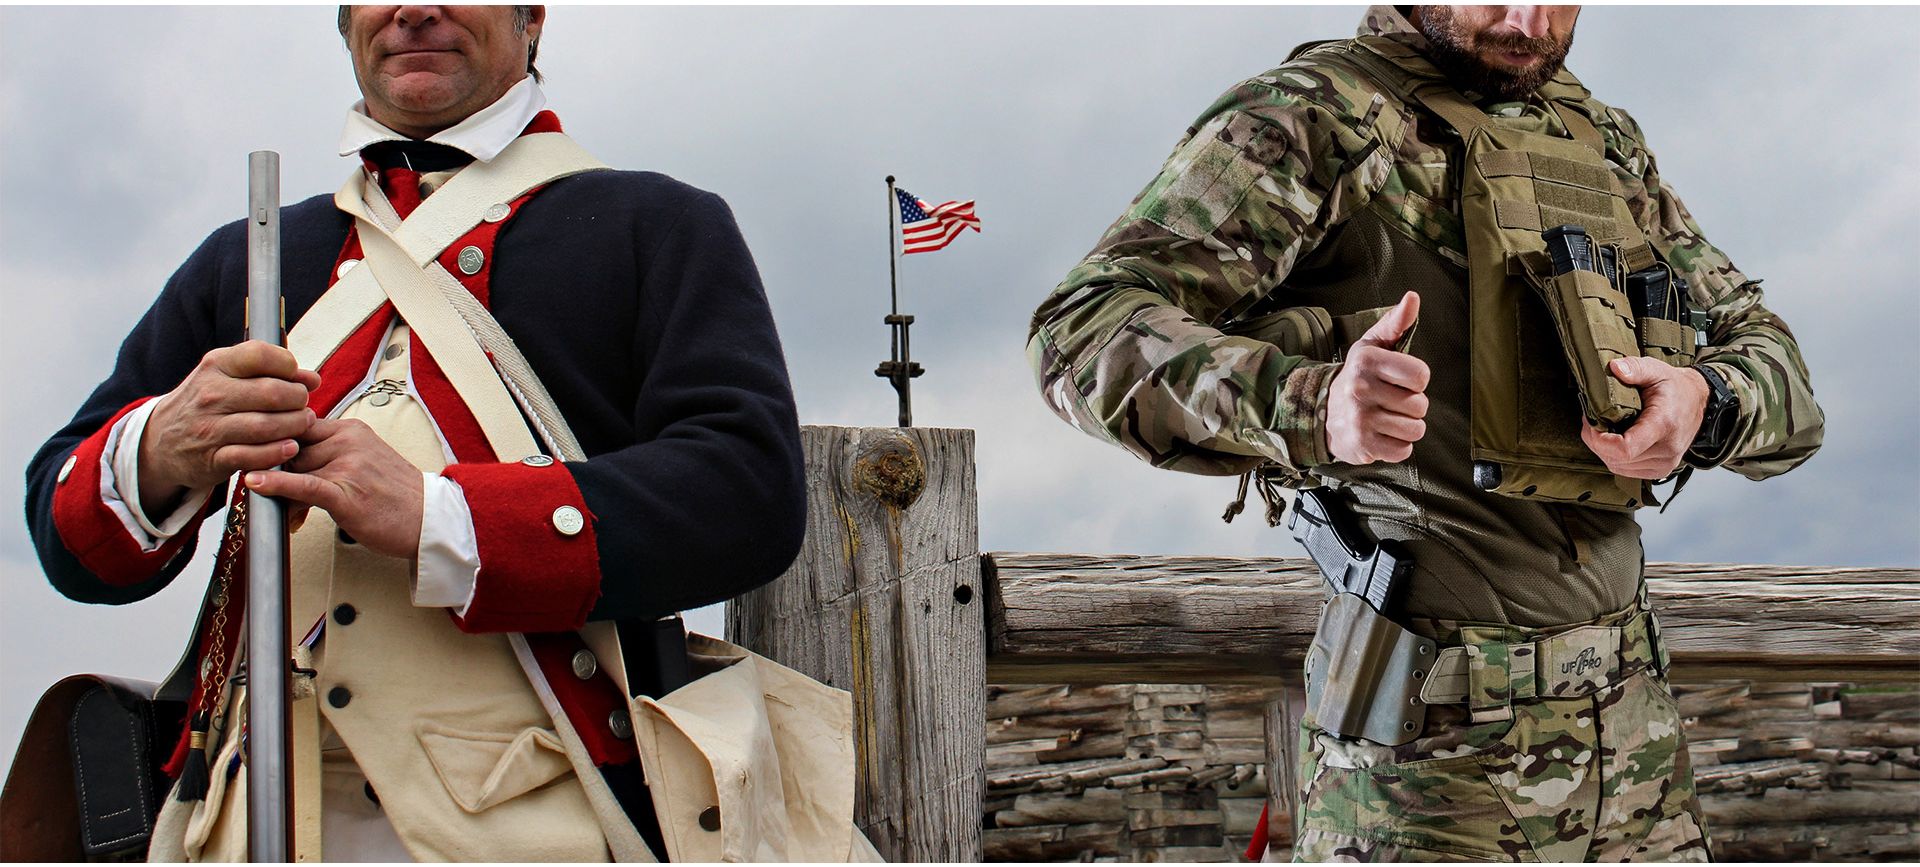 Military uniforms of the American Revolutionary War